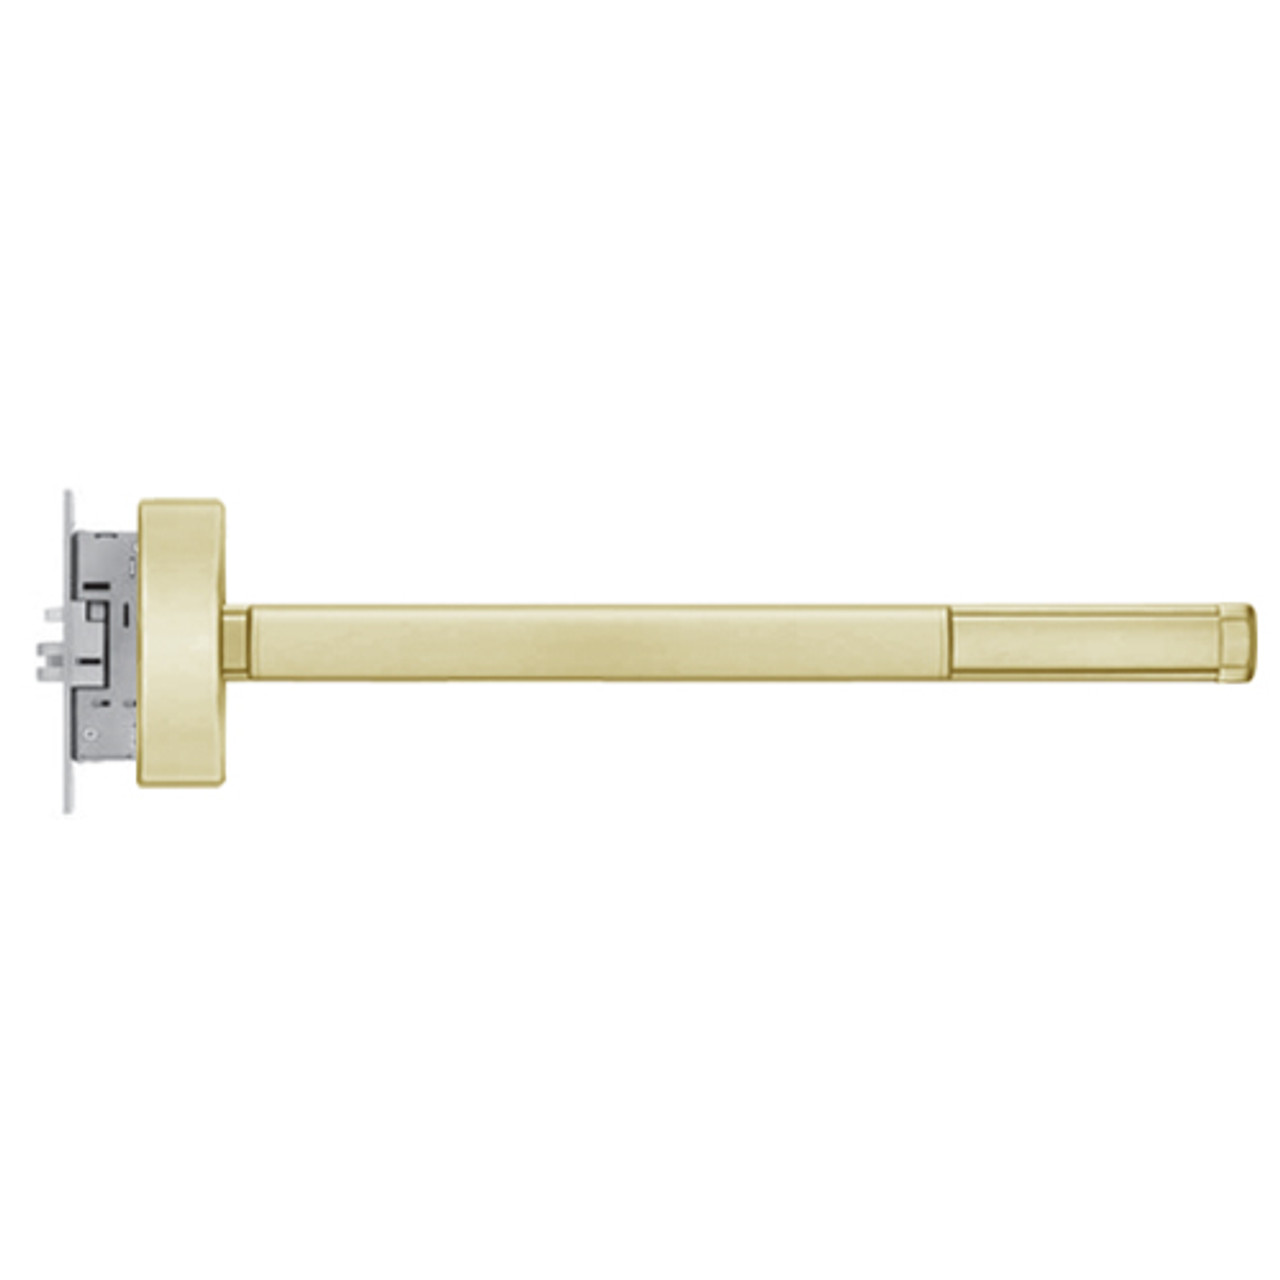 TS2301-LHR-606-48 PHI 2300 Series Apex Mortise Exit Device with Touchbar Monitoring Switch Prepped for Cover Plate in Satin Brass Finish